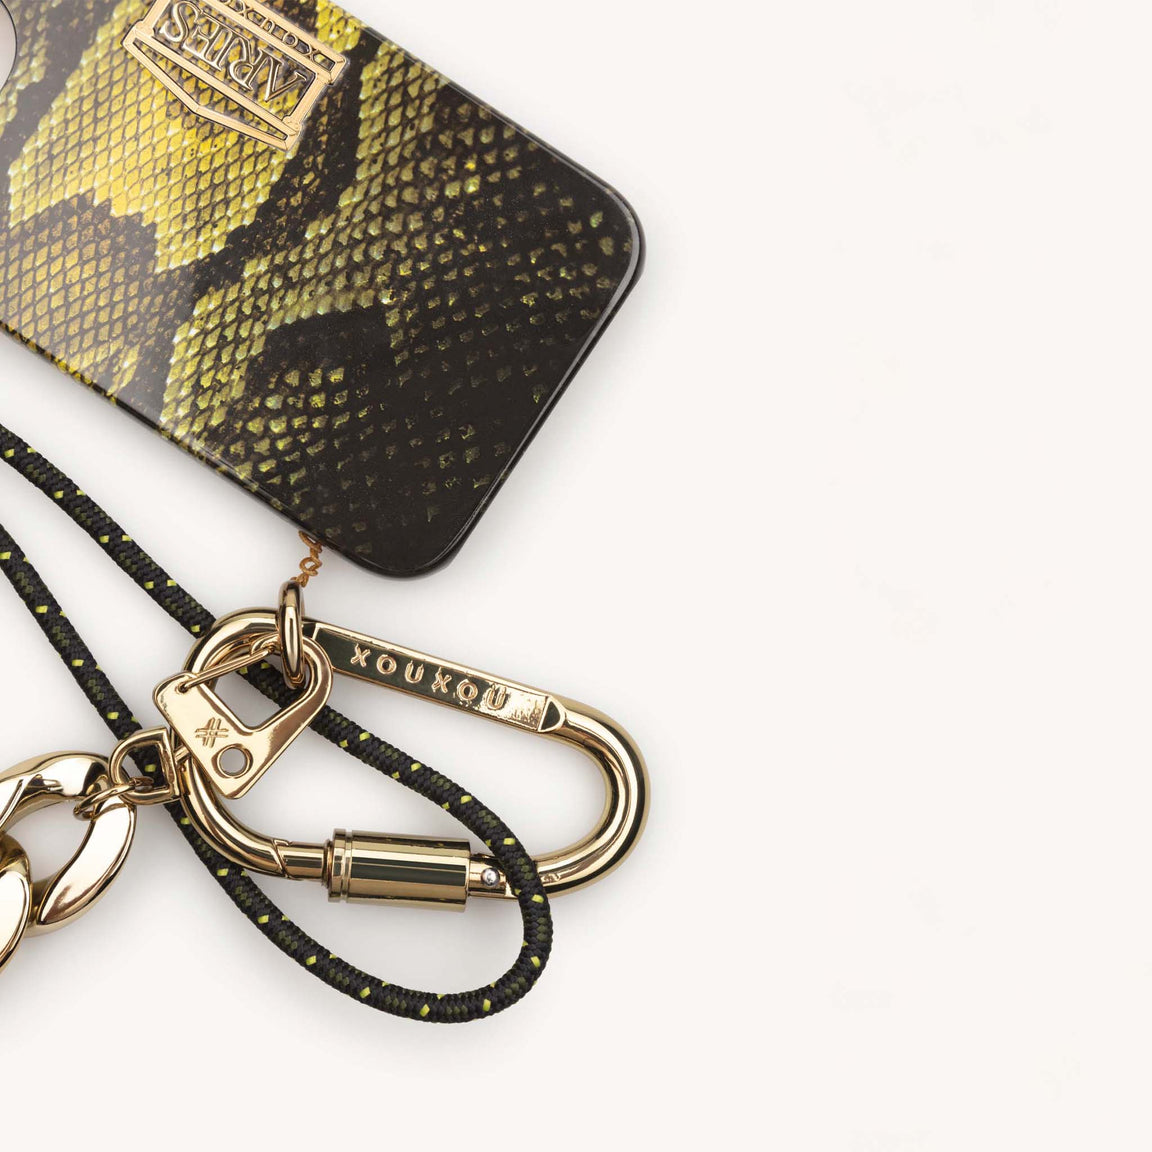 Aries x XOUXOU collab Phone Necklace with Rope and Chain with Snake pattern and 18k gold plating